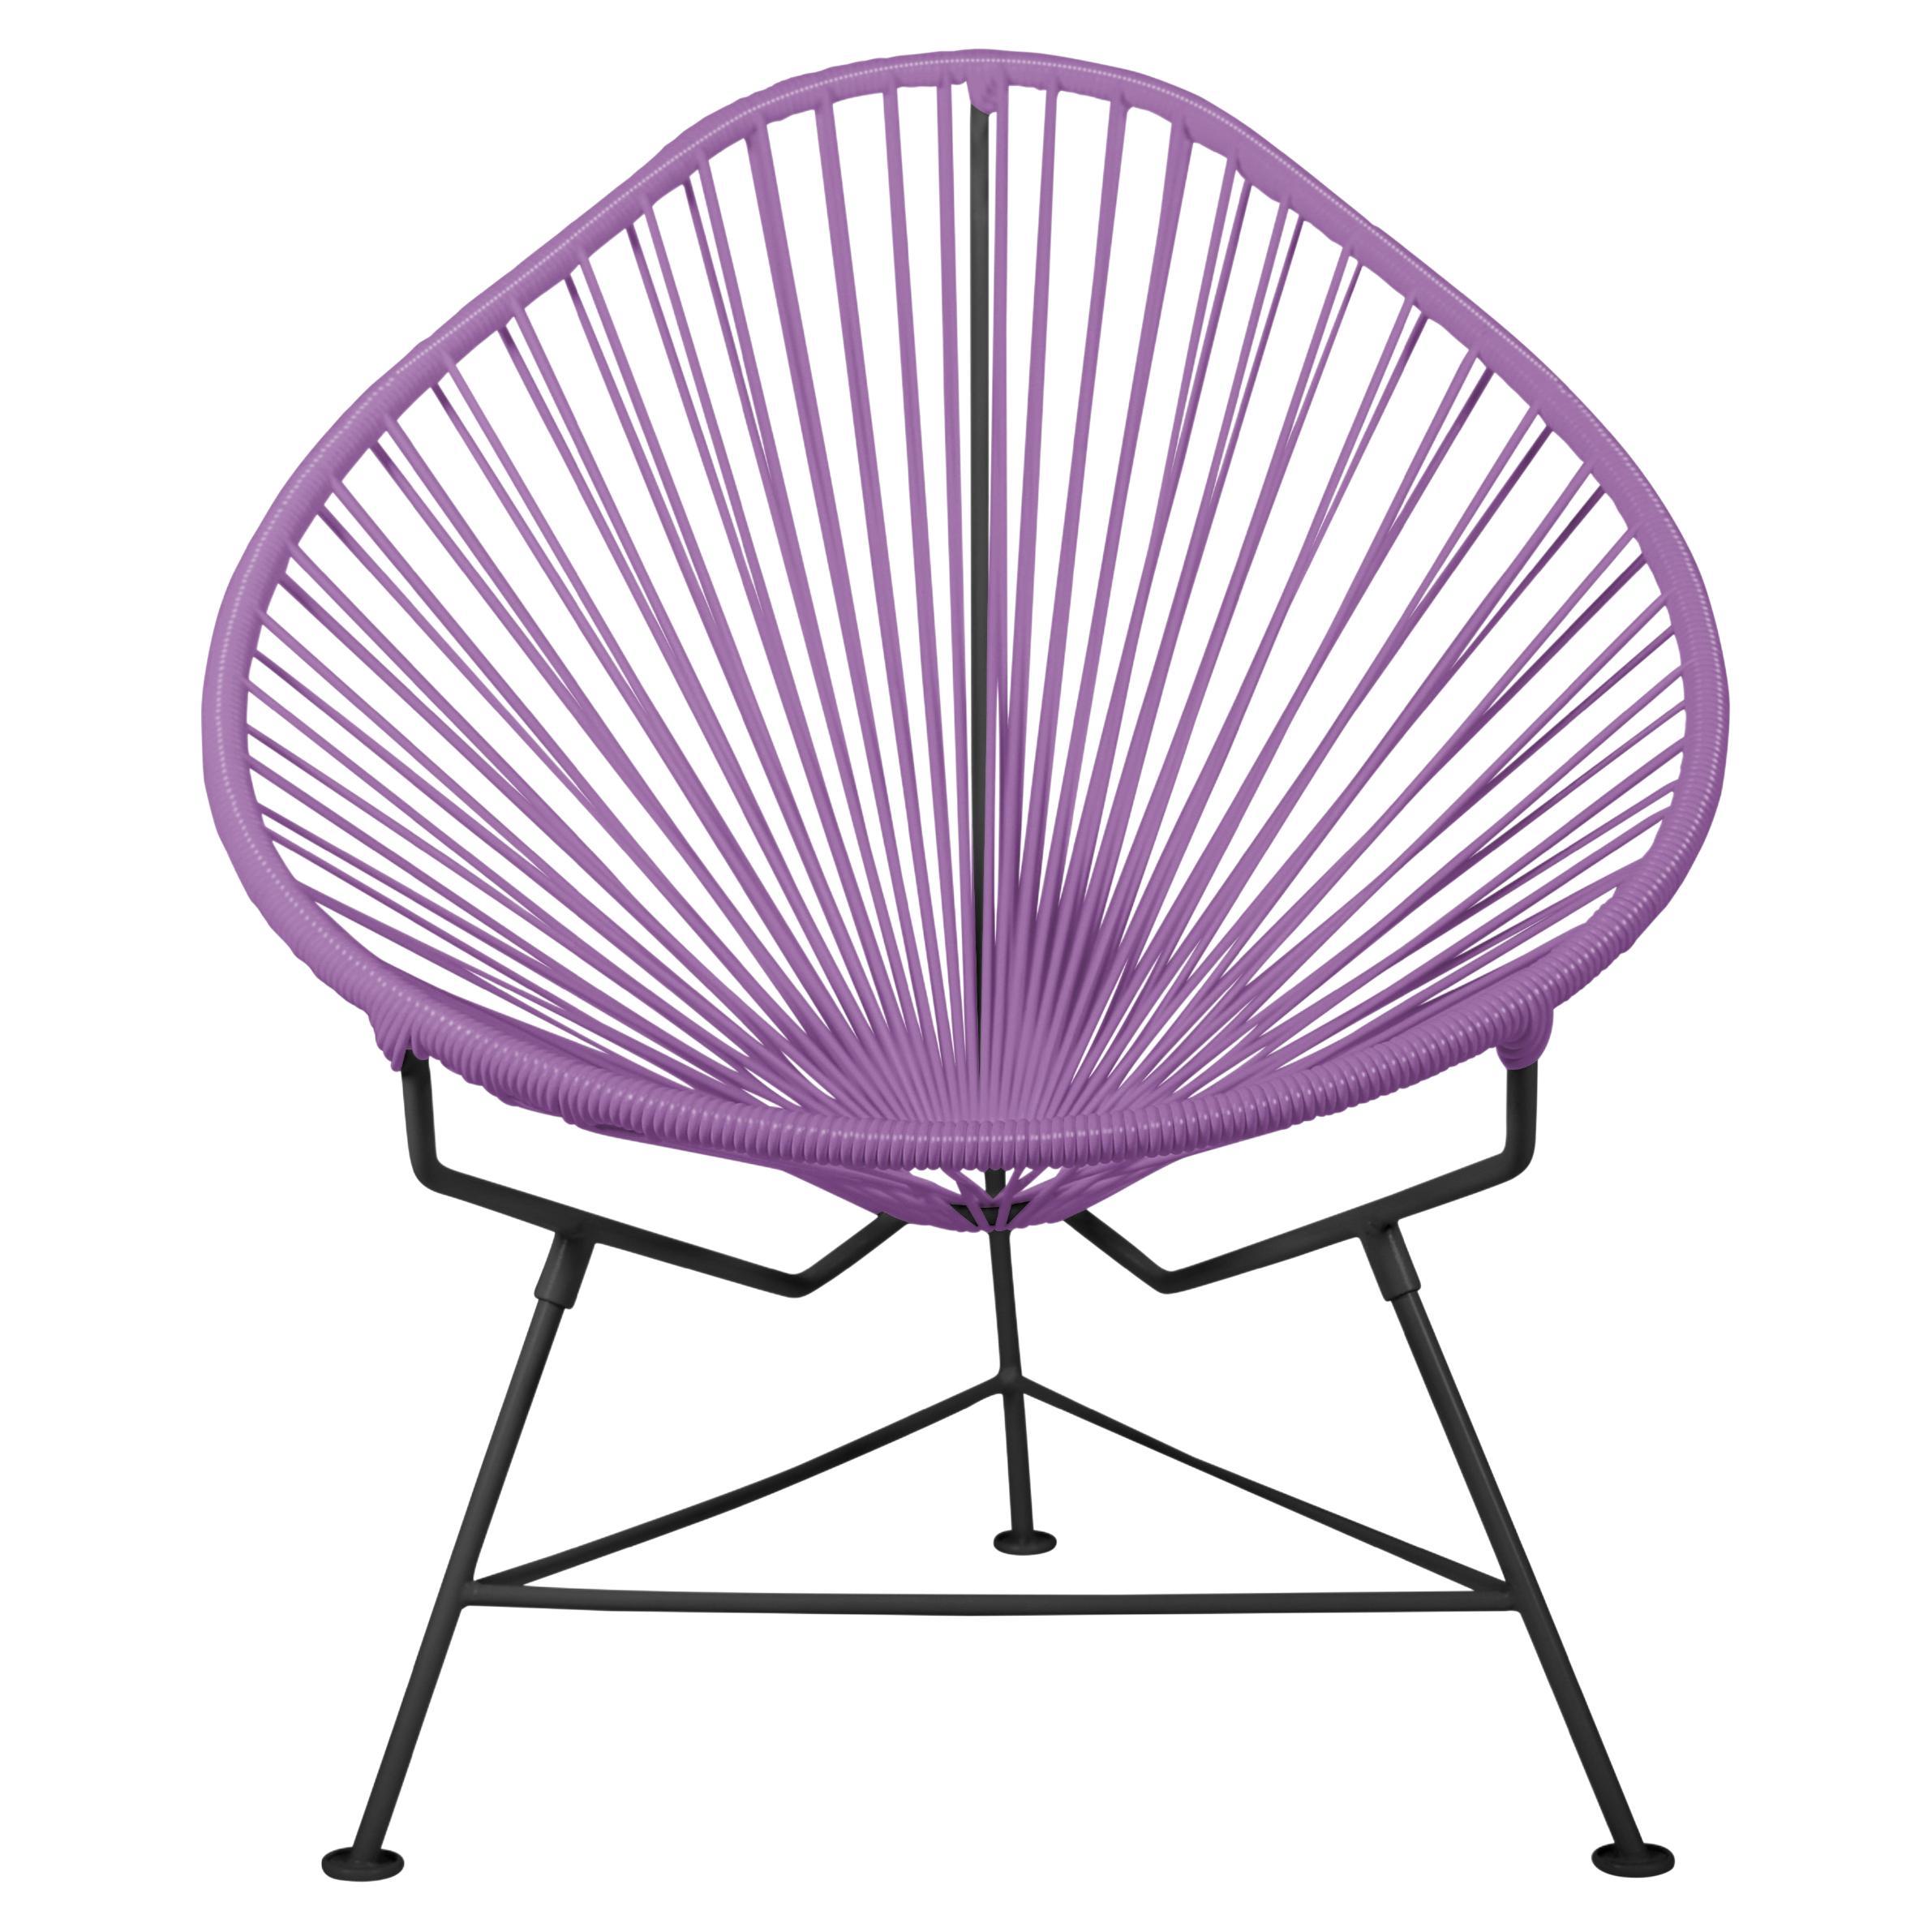 Innit Designs Acapulco Chair Orchid Weave on Black Frame For Sale